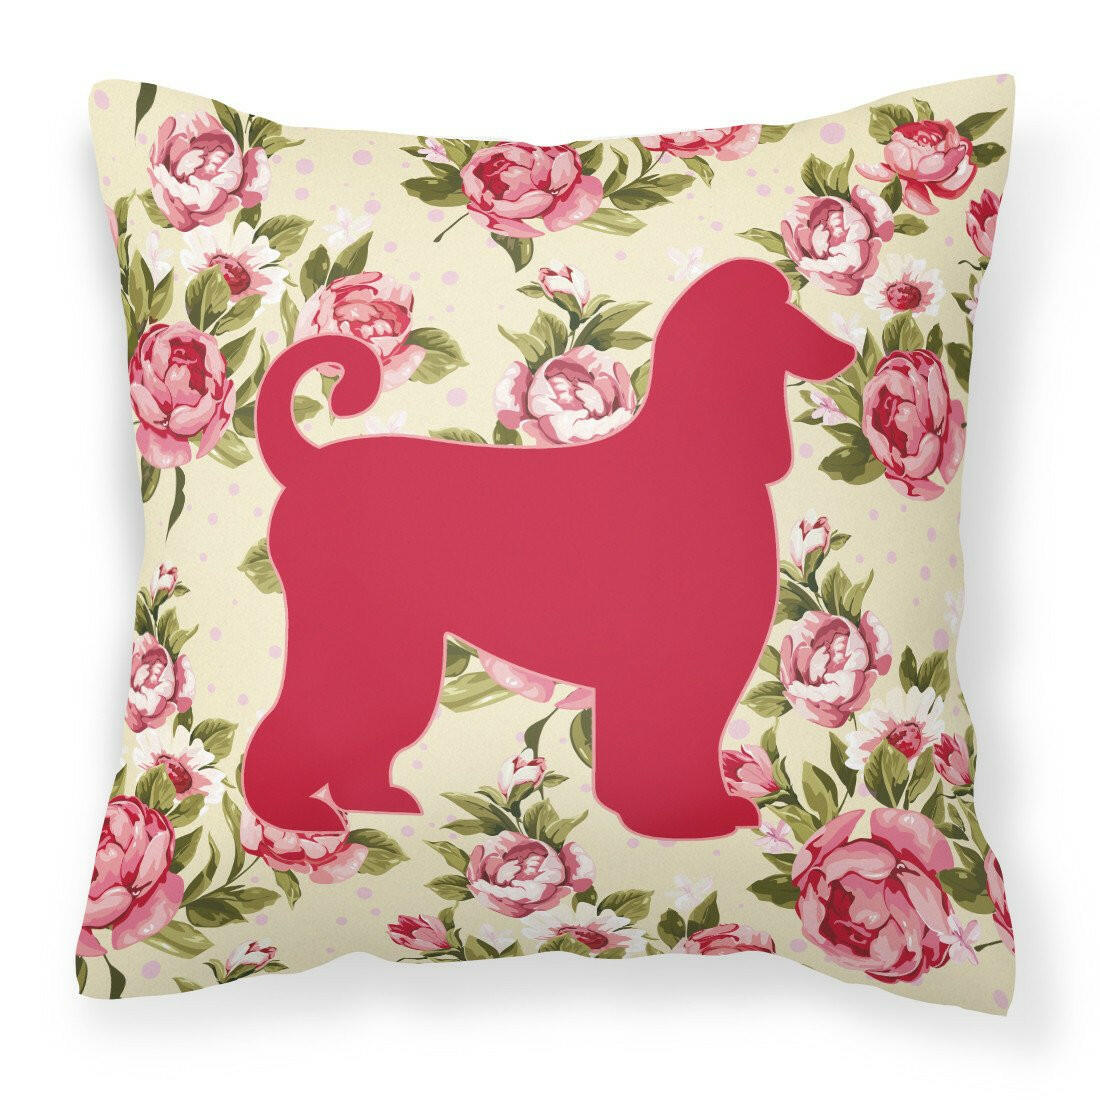 Afghan Hound Shabby Chic Yellow Roses  Fabric Decorative Pillow BB1066-RS-YW-PW1414 - the-store.com